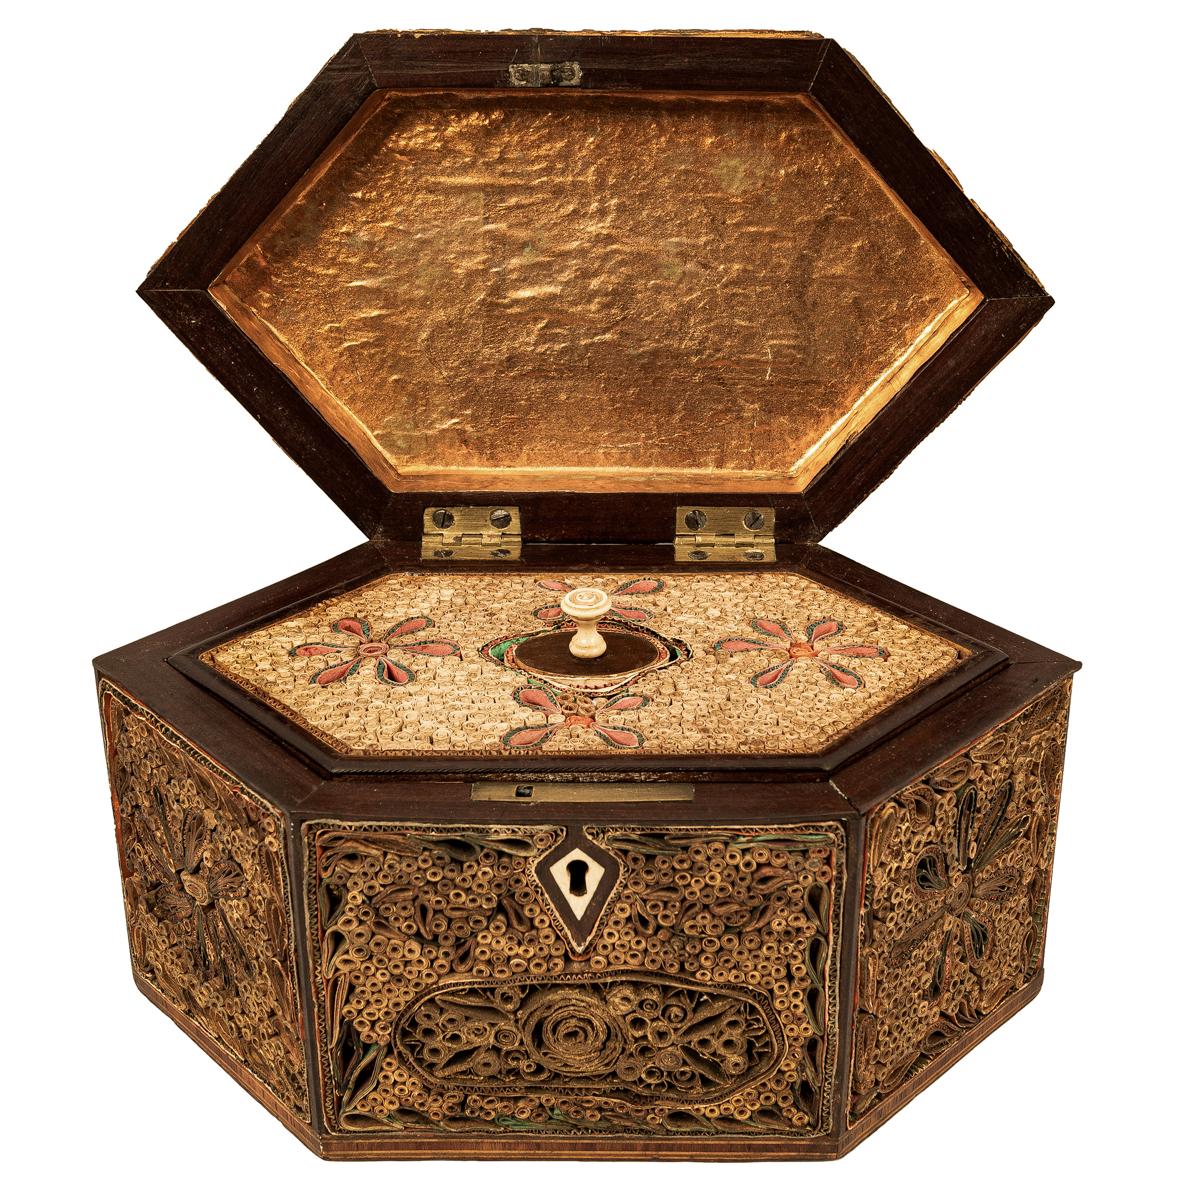 A good antique Georgian scrollwork tea caddy, circa 1780.
The caddy of hexagonal shape, the front, back & cover with overall decoration of paper scrolls in stylized floral & foliate motifs. The caddy having a hinged lid with a turned brass hinged